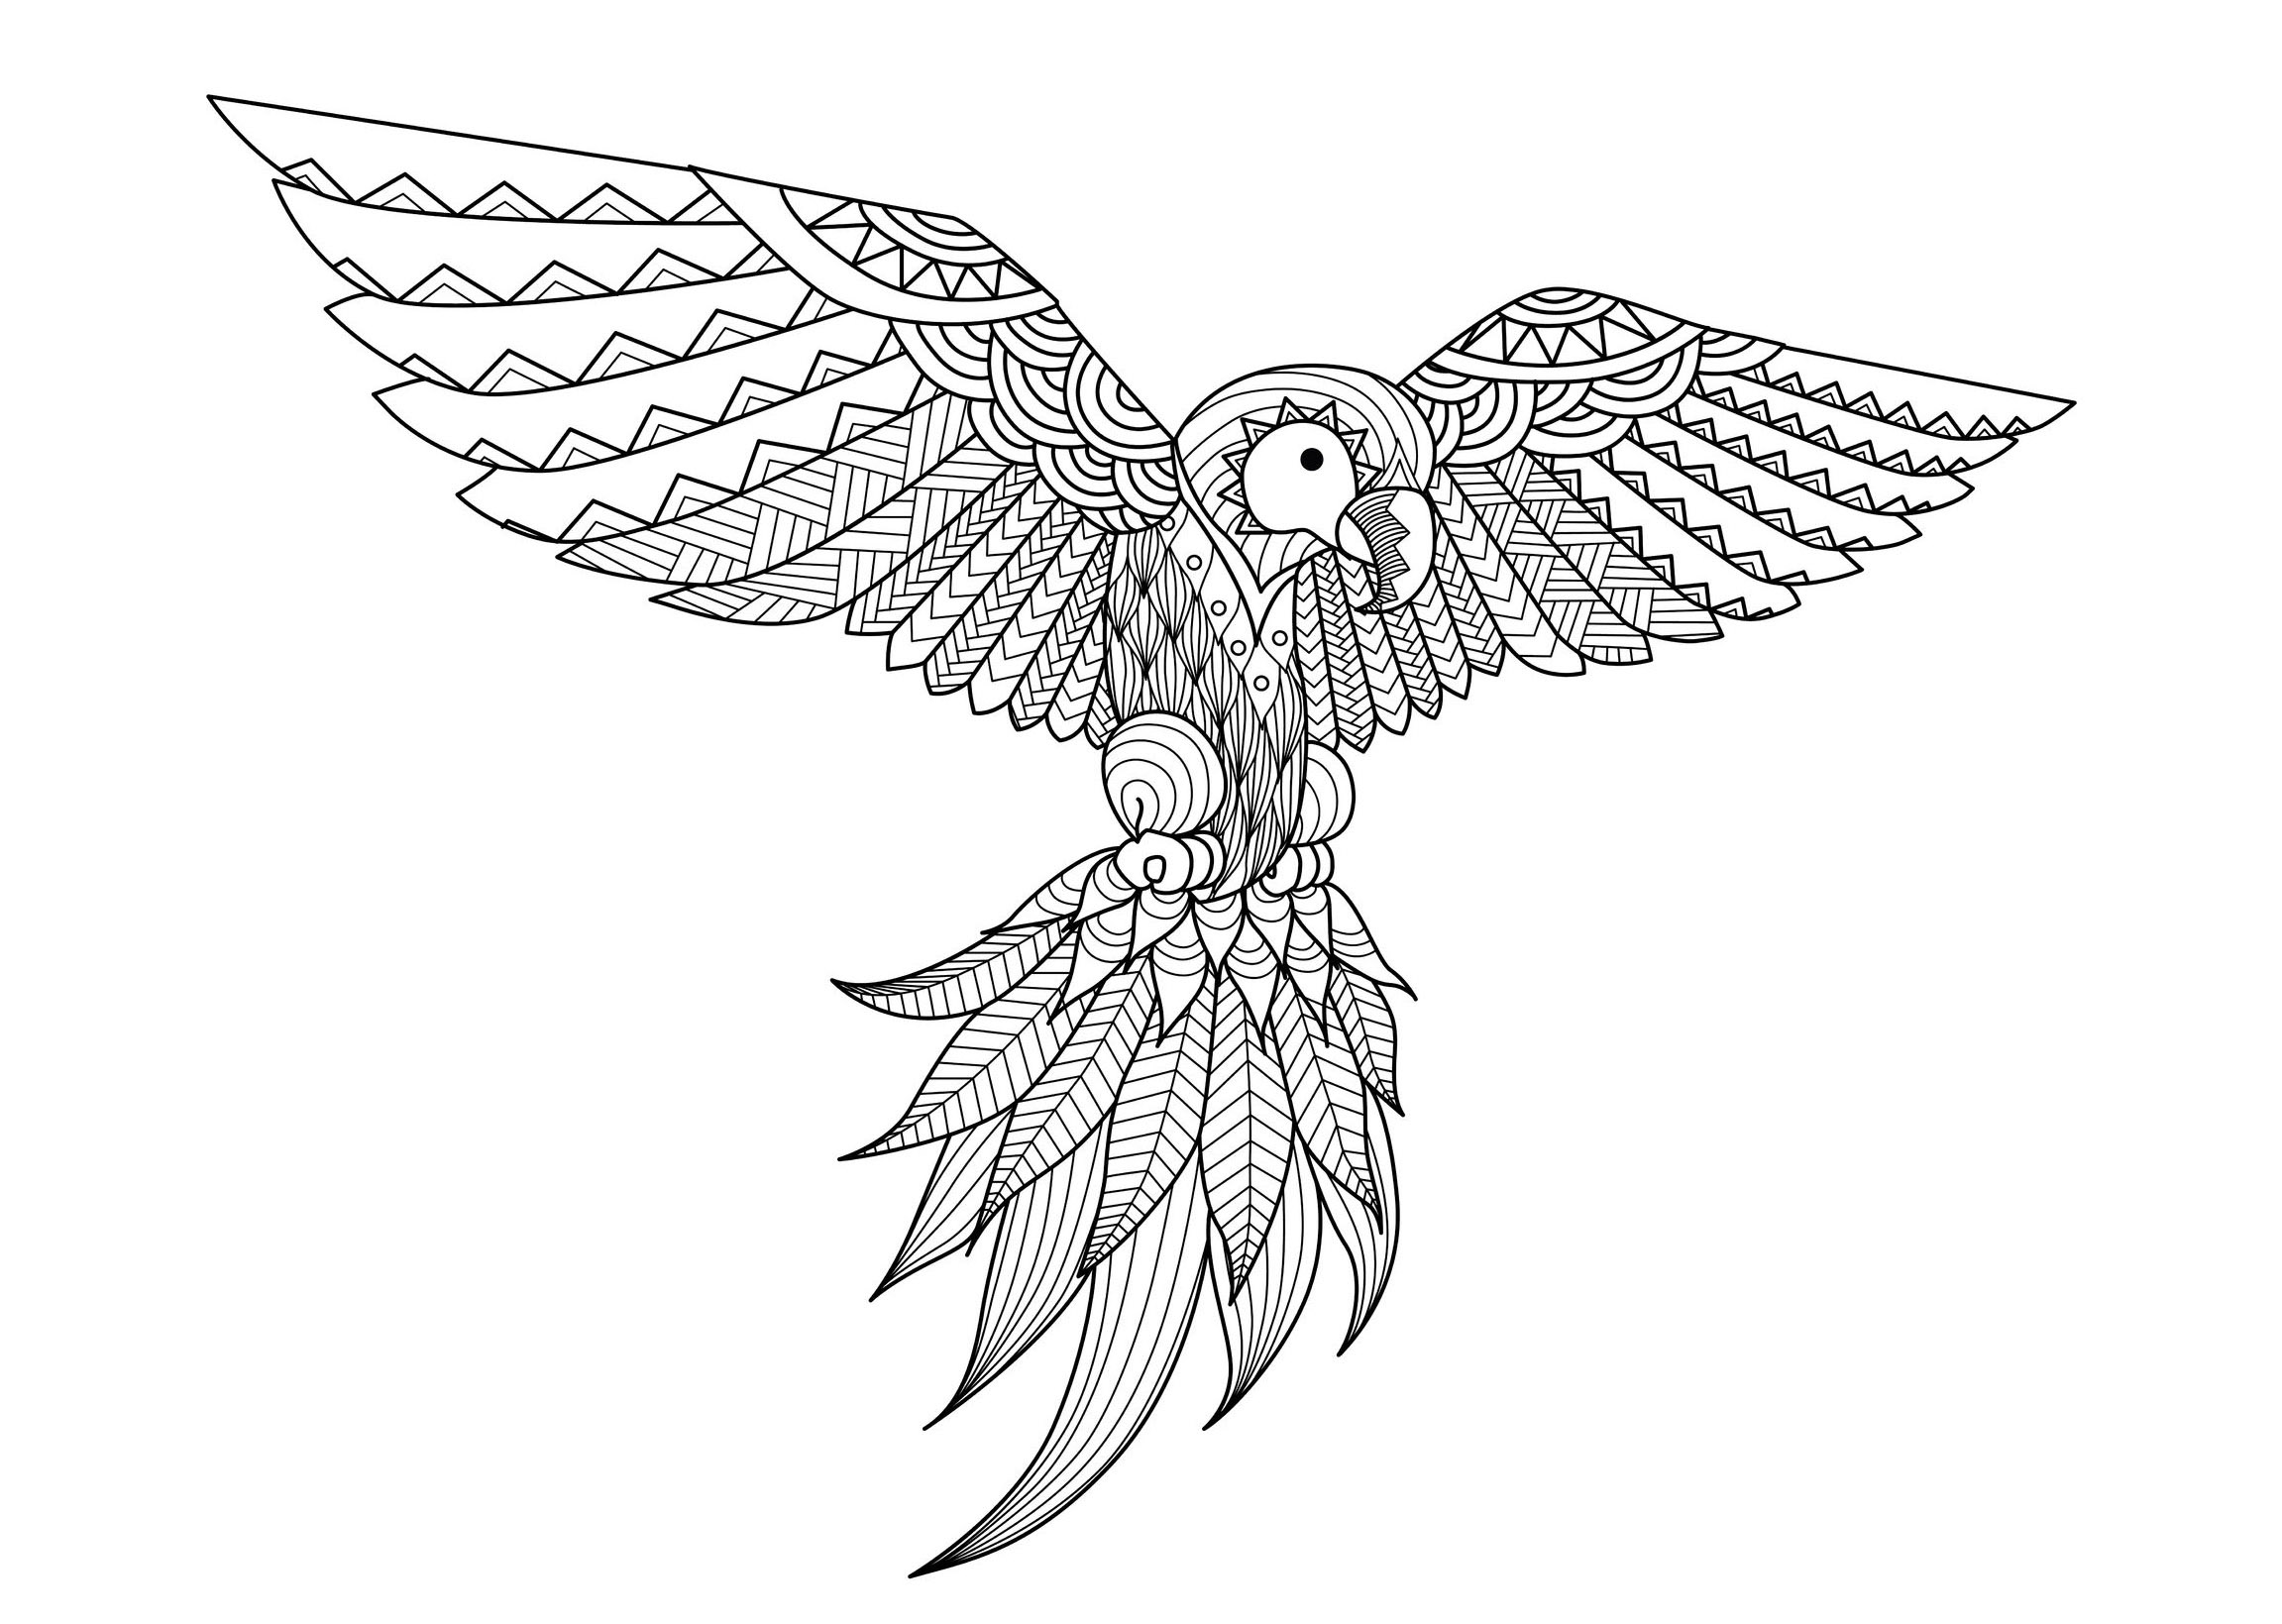 A beautiful Zentangle parrot. Each part of this parrot's body is made up of elegant and varied Zentangle patterns.
